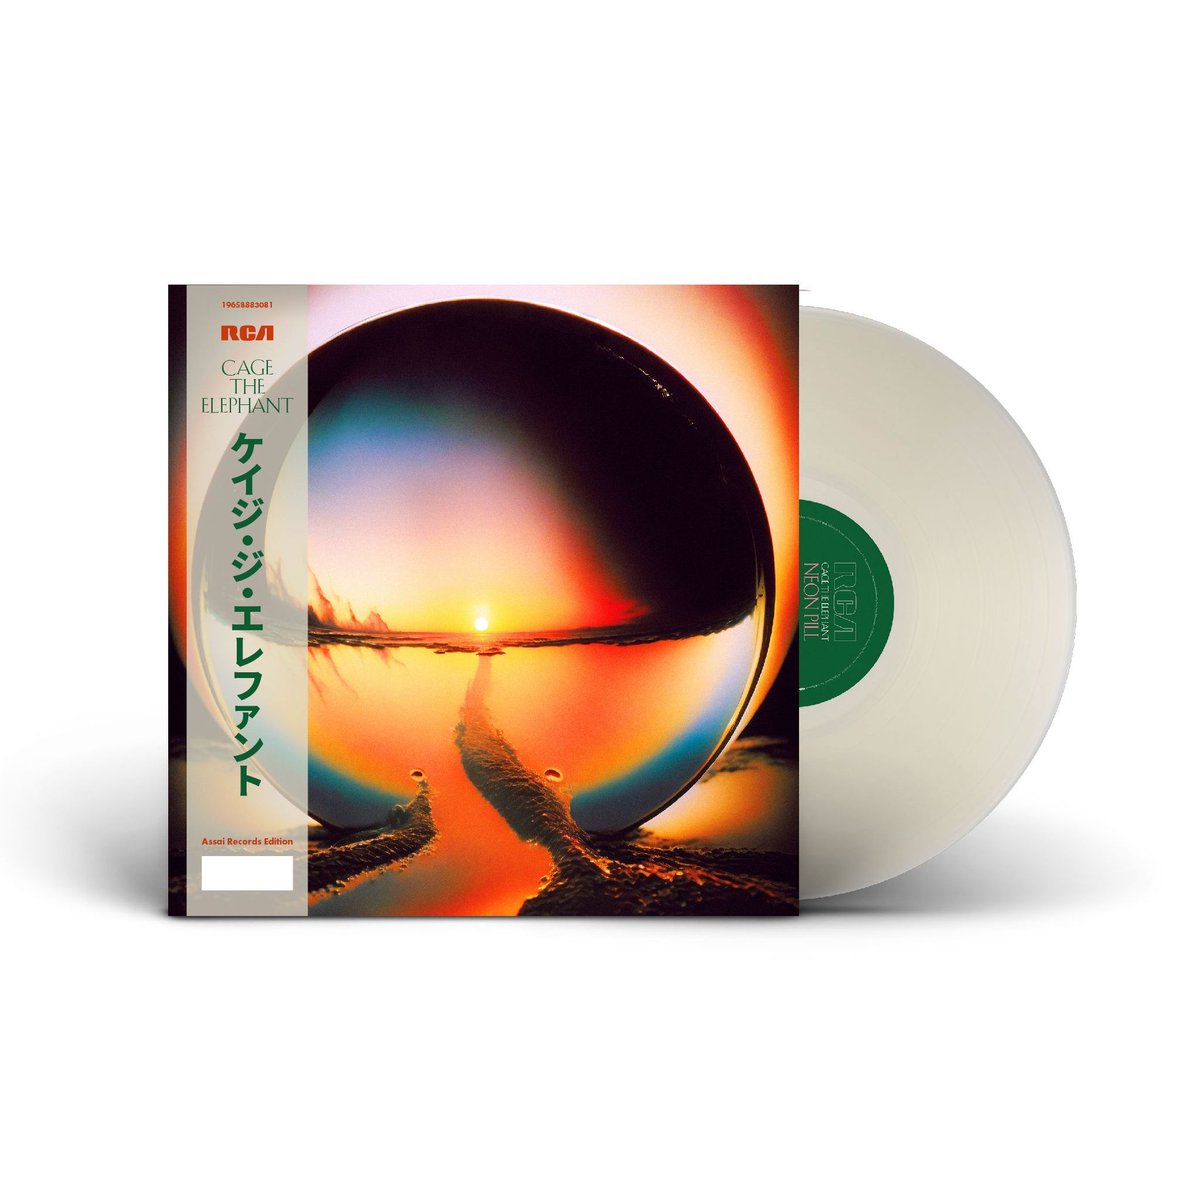 🐘@CageTheElephant ASSAI OBI EDITION🐘 🐘Assai Records Exclusive Japanese Inspired Obi Strip 🐘Limited to 200 copies 🐘Milky Clear Colour Vinyl 🐘Hand-numbered Album Due Out 17th May 2024! PRE-ORDER NOW: tinyurl.com/CTEAssaiObi #assai #records #dundee #cagetheelephant